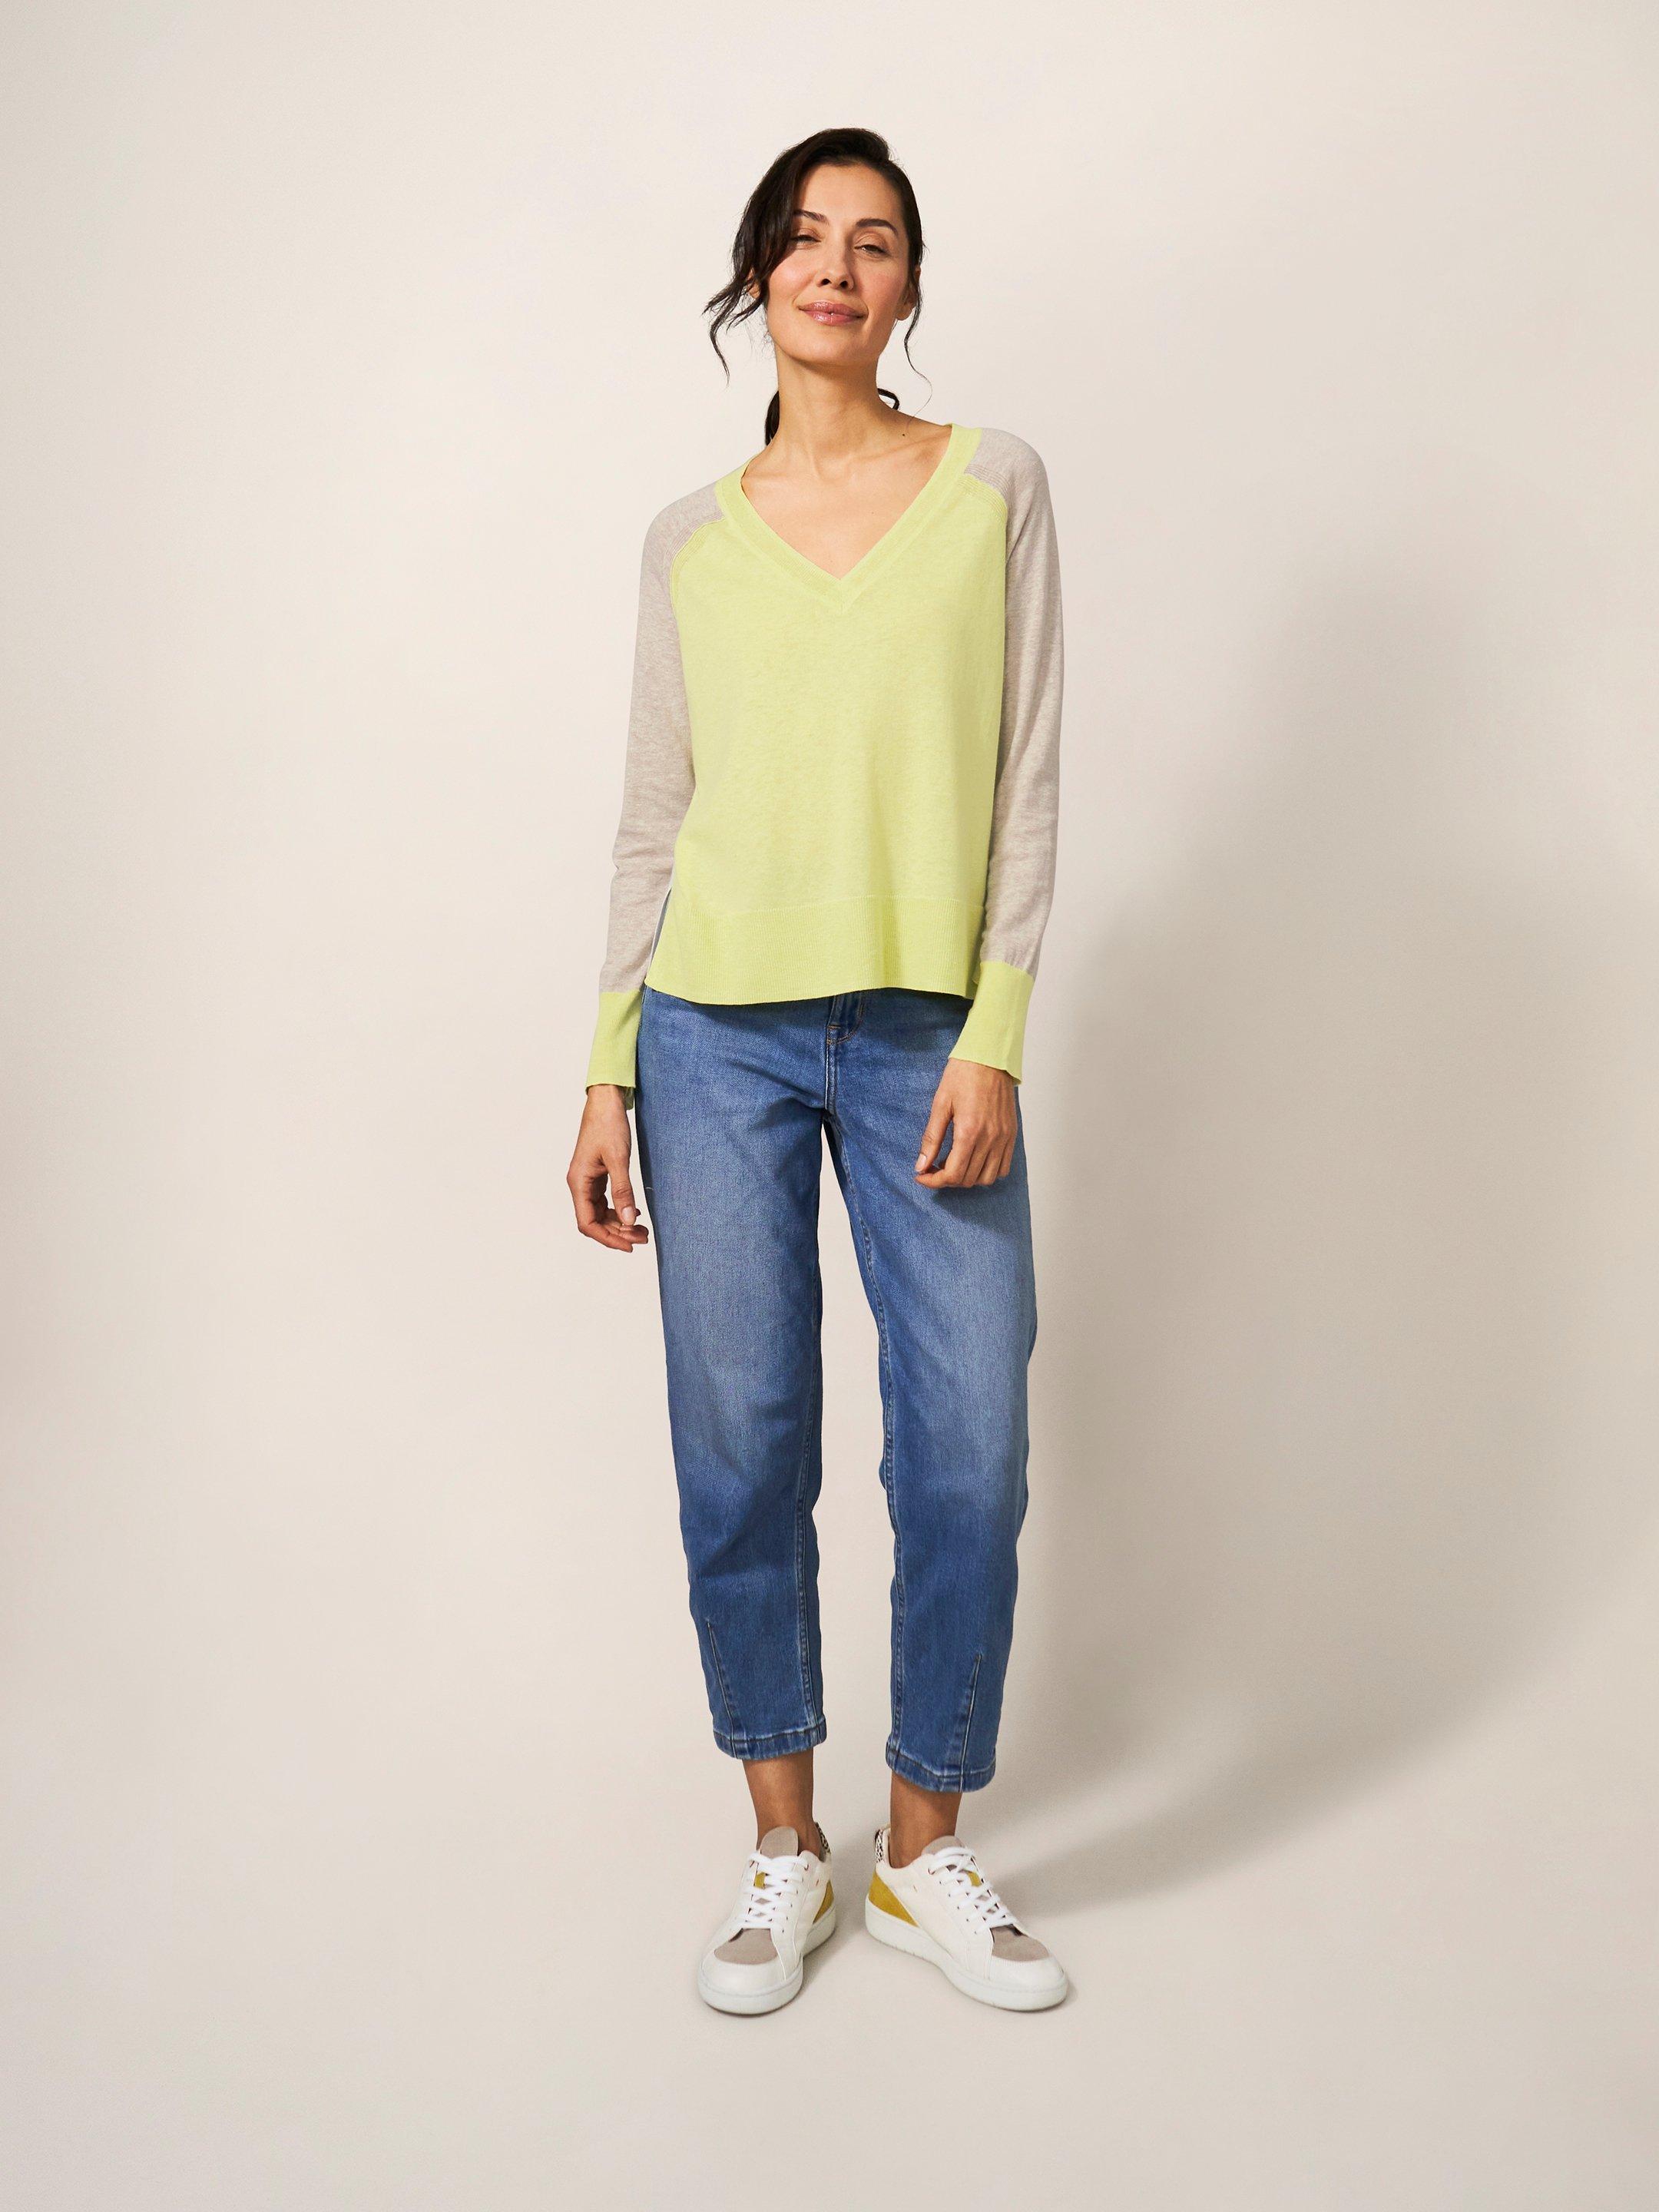 CARRIE COLOURBLOCK JUMPER in YELLOW MLT - MODEL FRONT